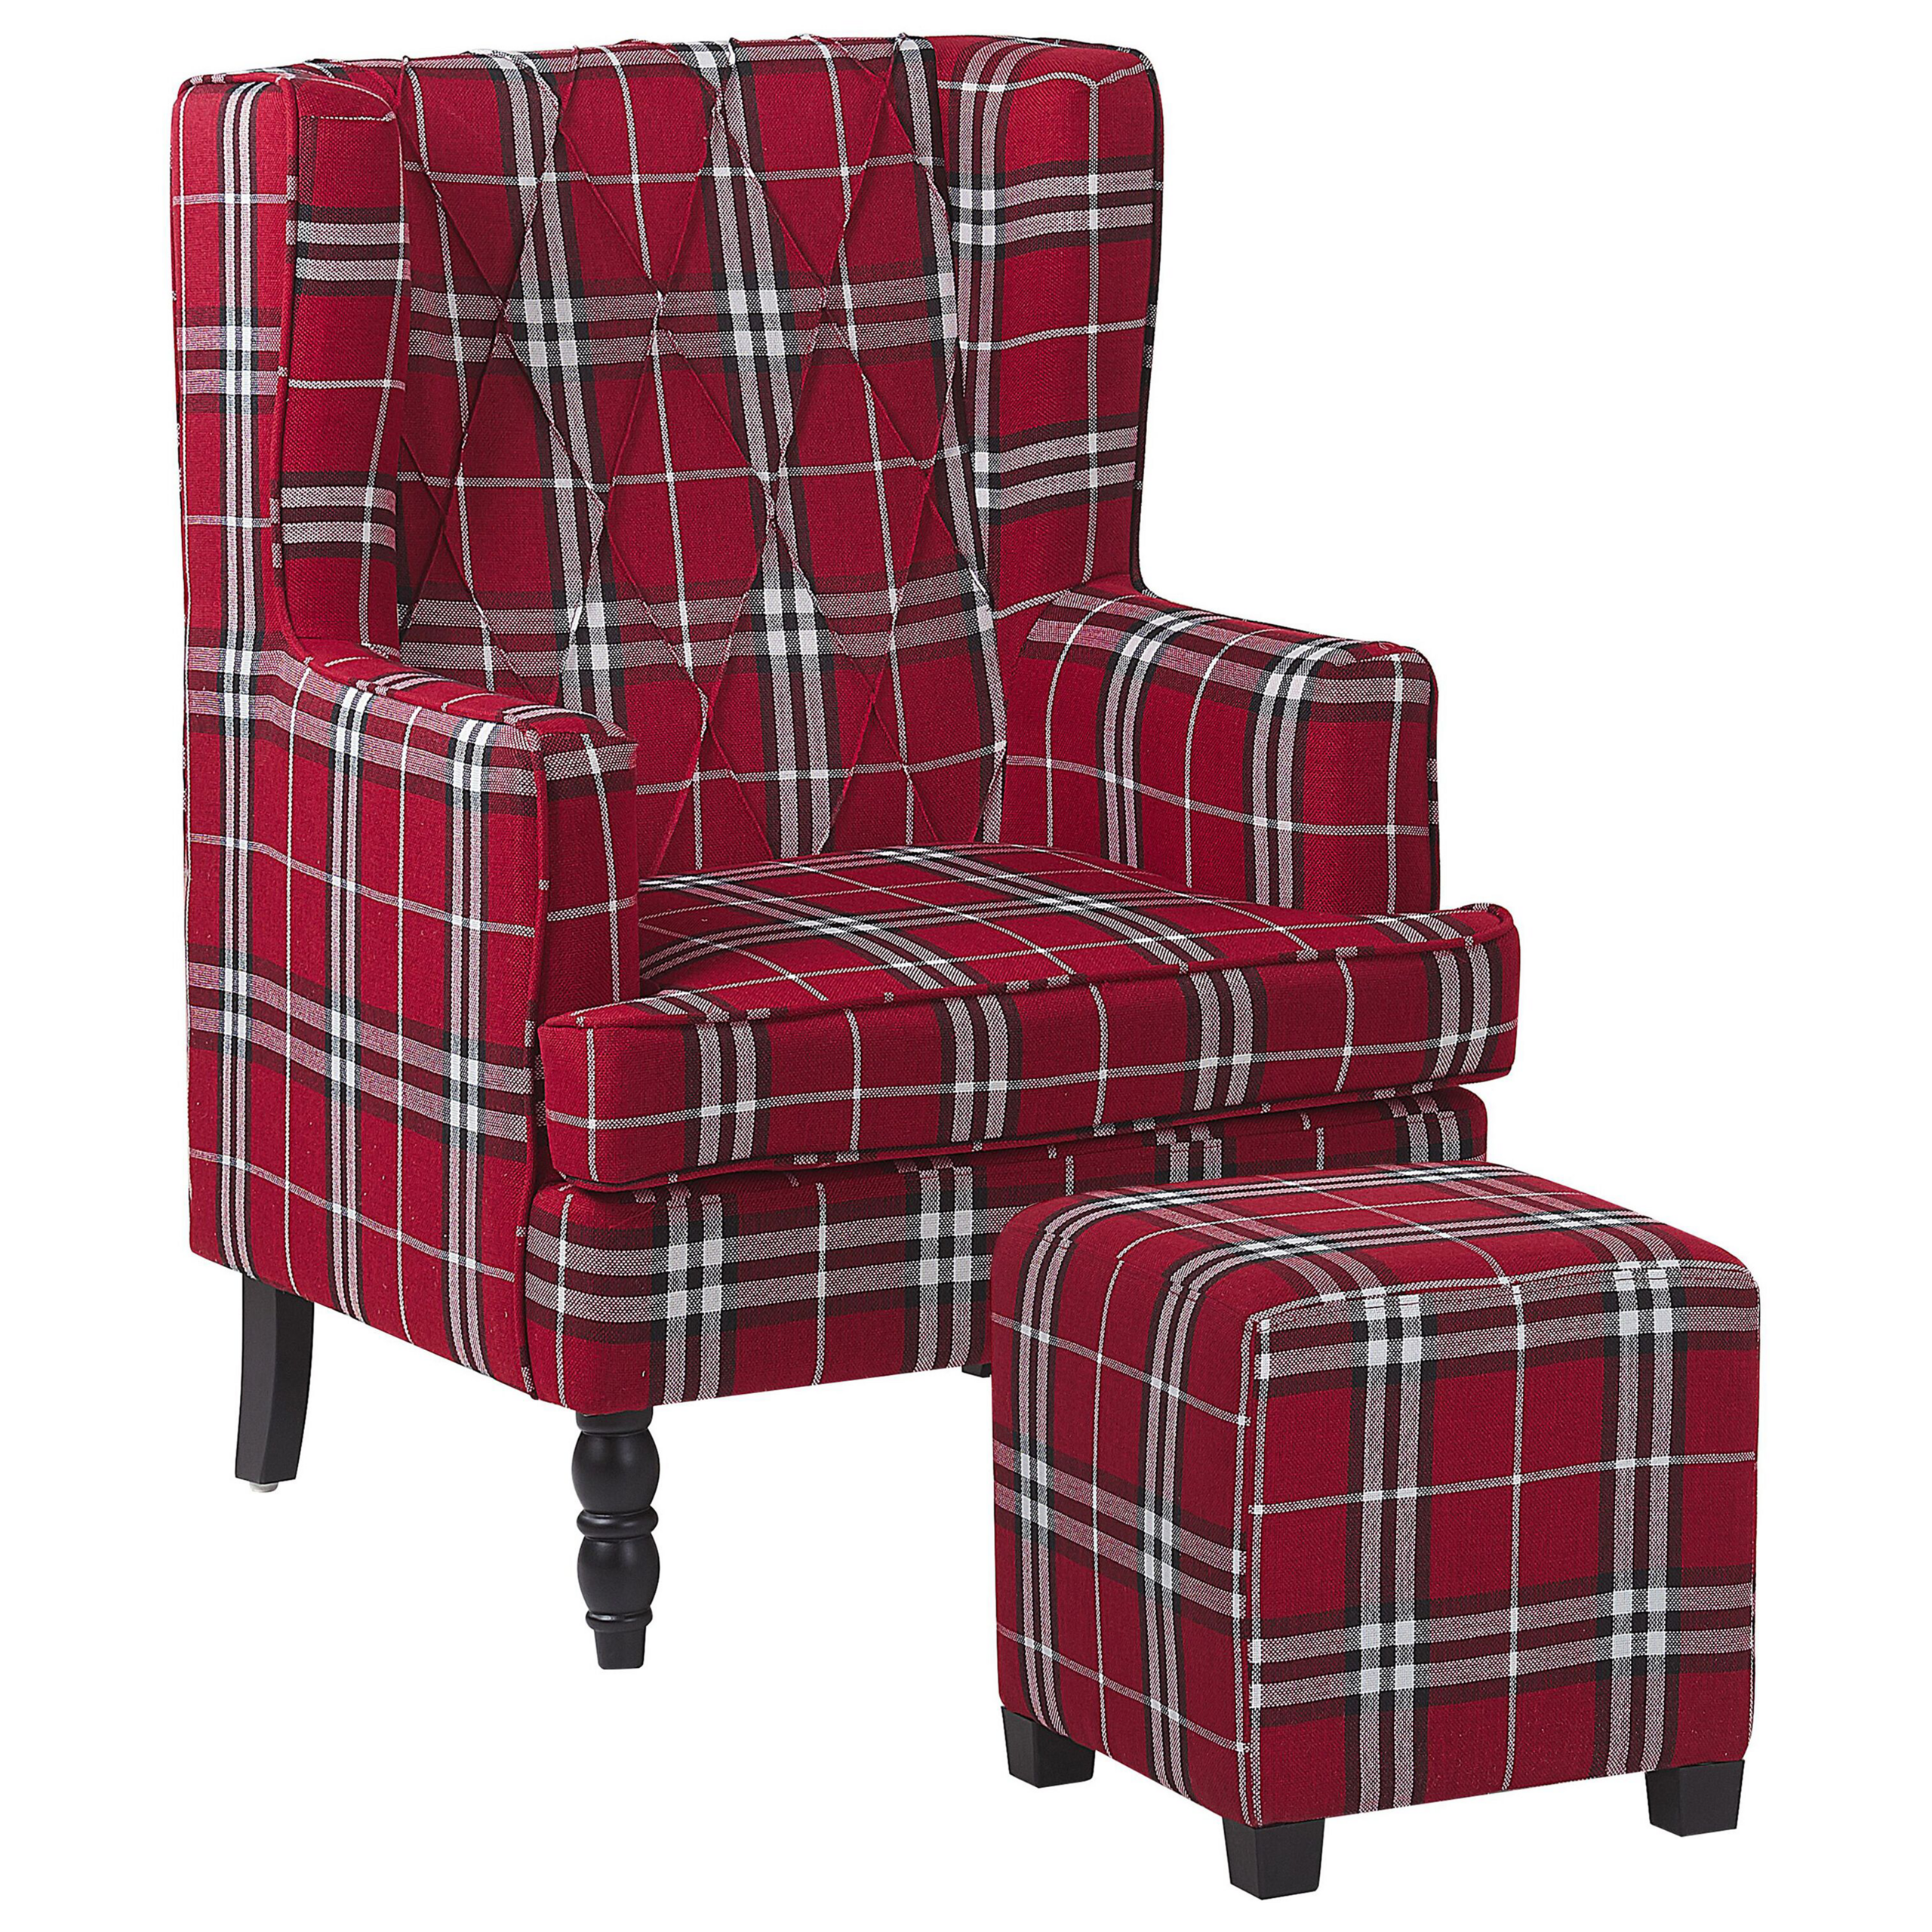 Beliani Armchair with Footstool Red and Black Chequered Pattern Fabric Wooden Legs Wingback Style